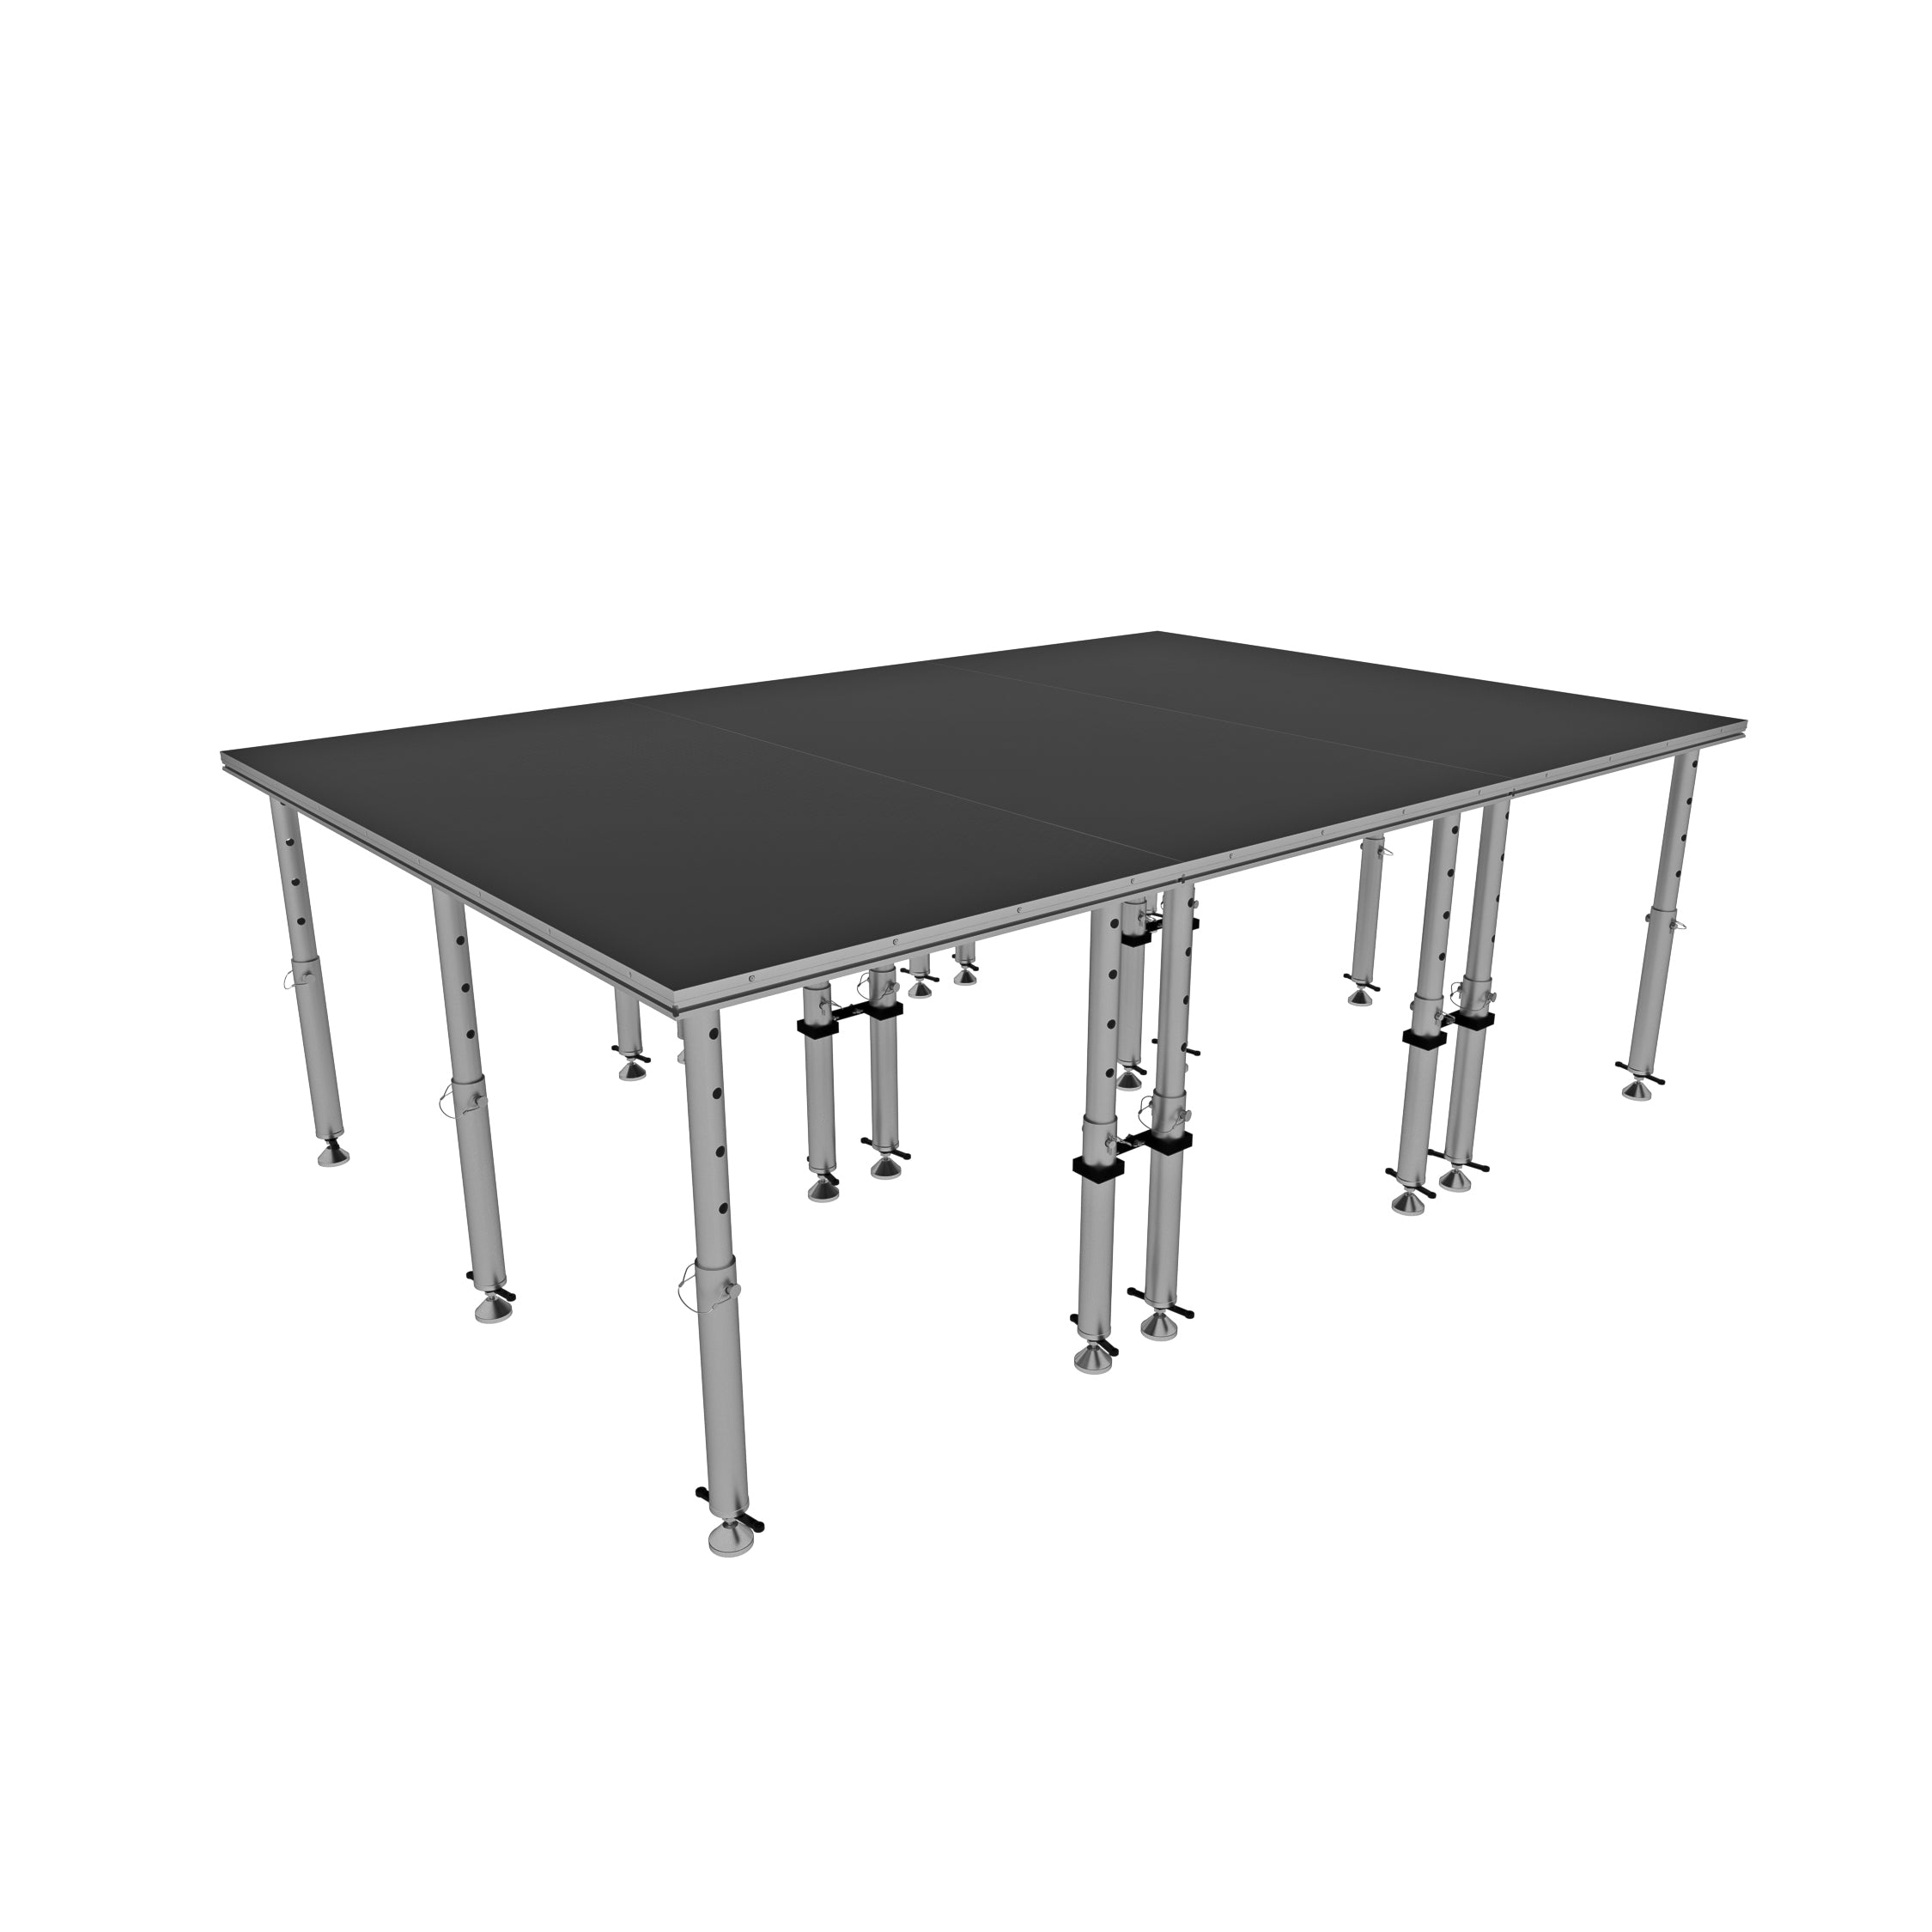 Pro X 12FT x 8FT StageQ 3-Stage Platforms Platforms 4FT x 8FT Package Height Adjustable 28-48 inch XSQ-12X8PKG48